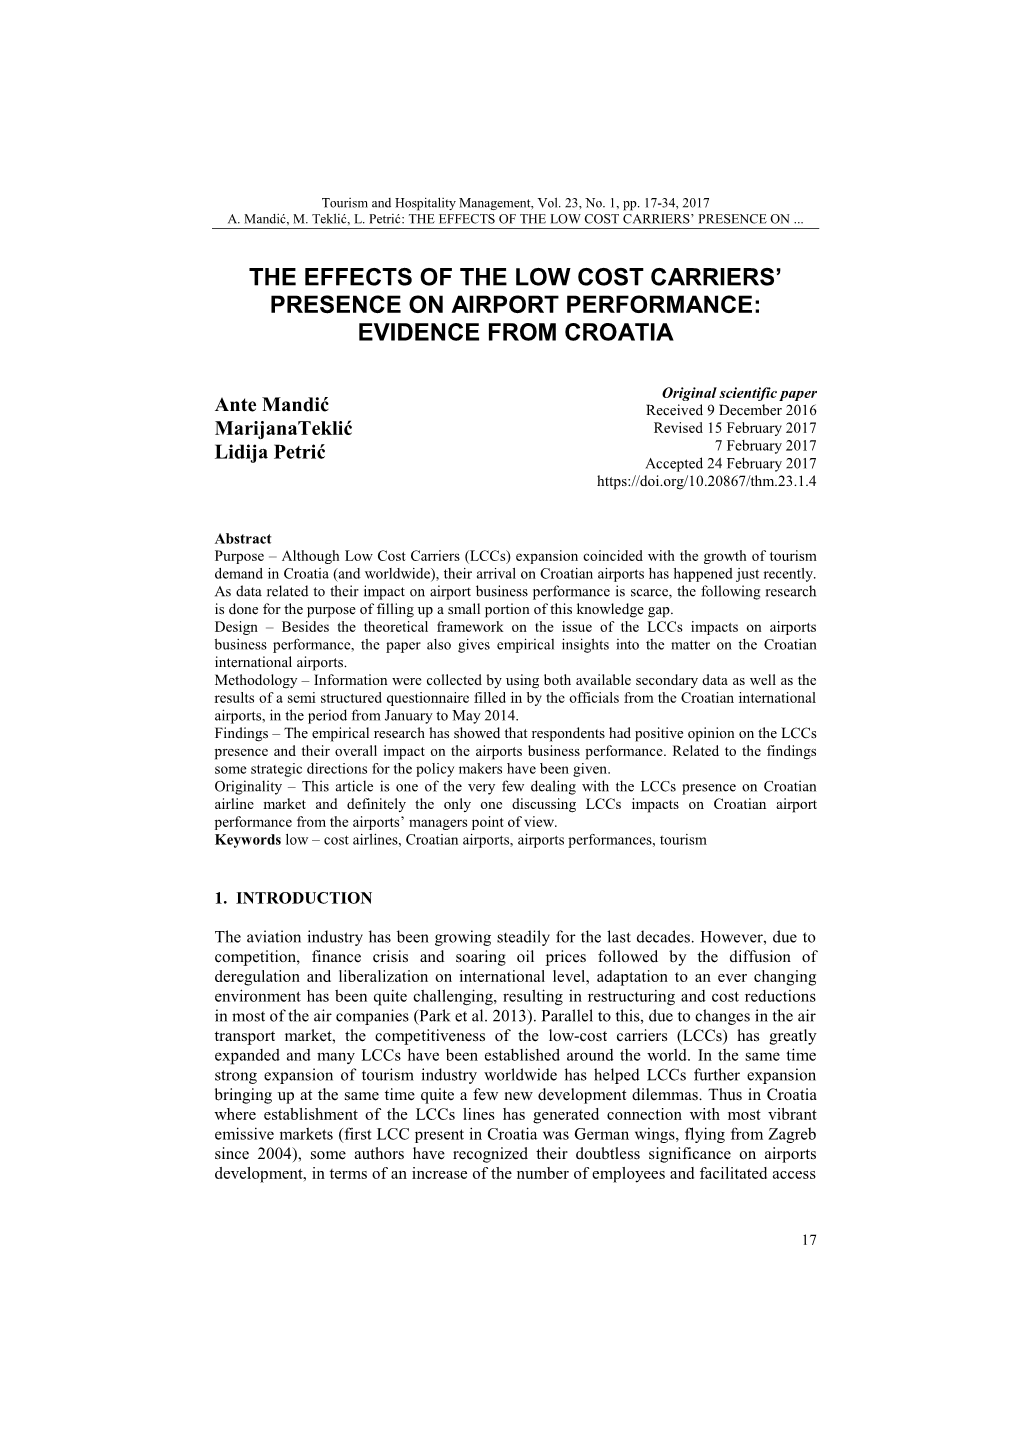 The Effects of the Low Cost Carriers' Presence On